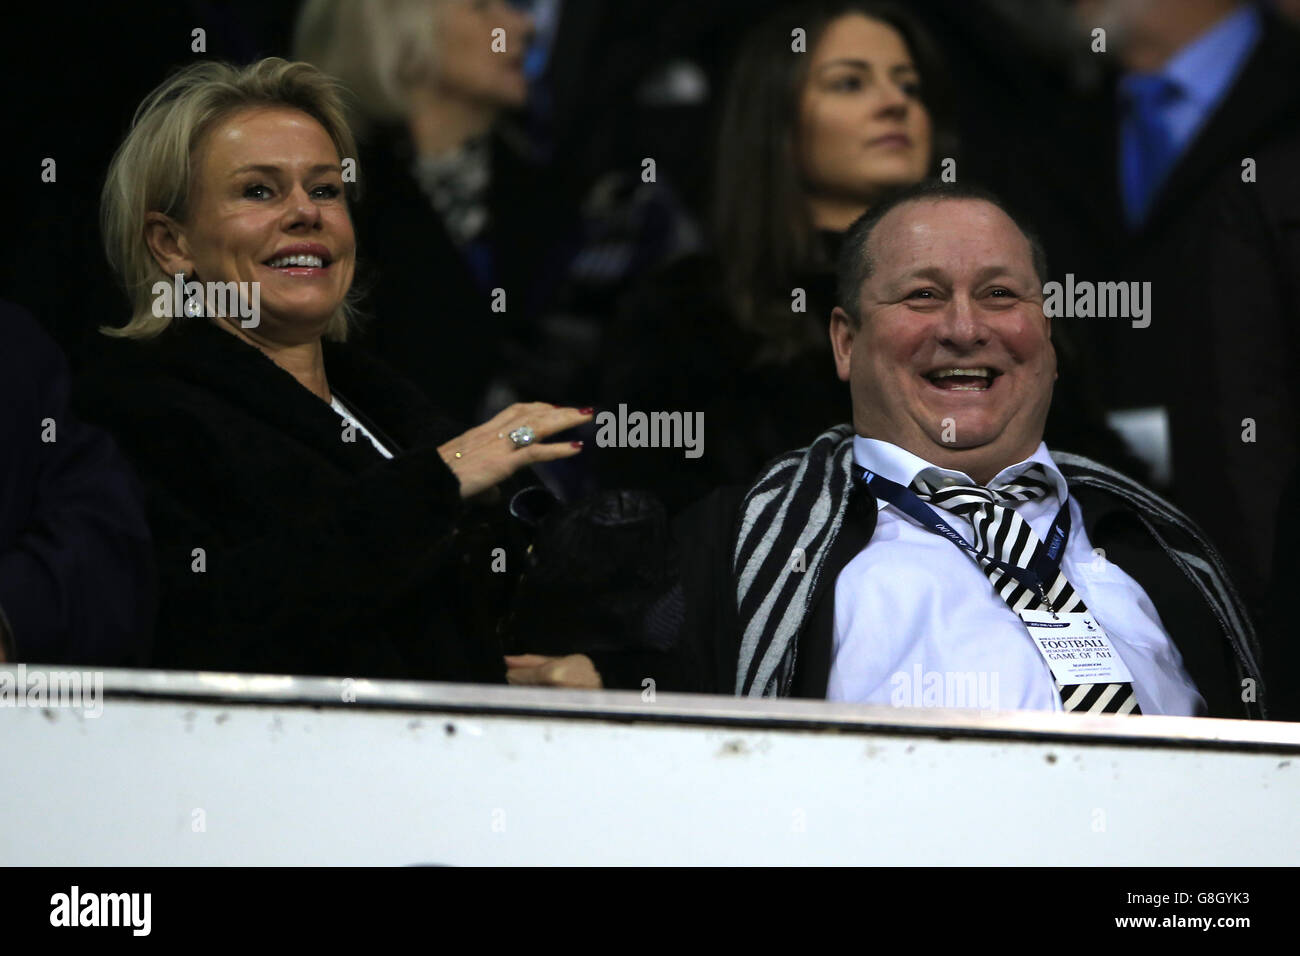 Newcastle United owner Mike Ashley (centre) and wife Linda Ashley (left) watch from the stands during the Barclays Premier League match at White Hart Lane, London. Stock Photo